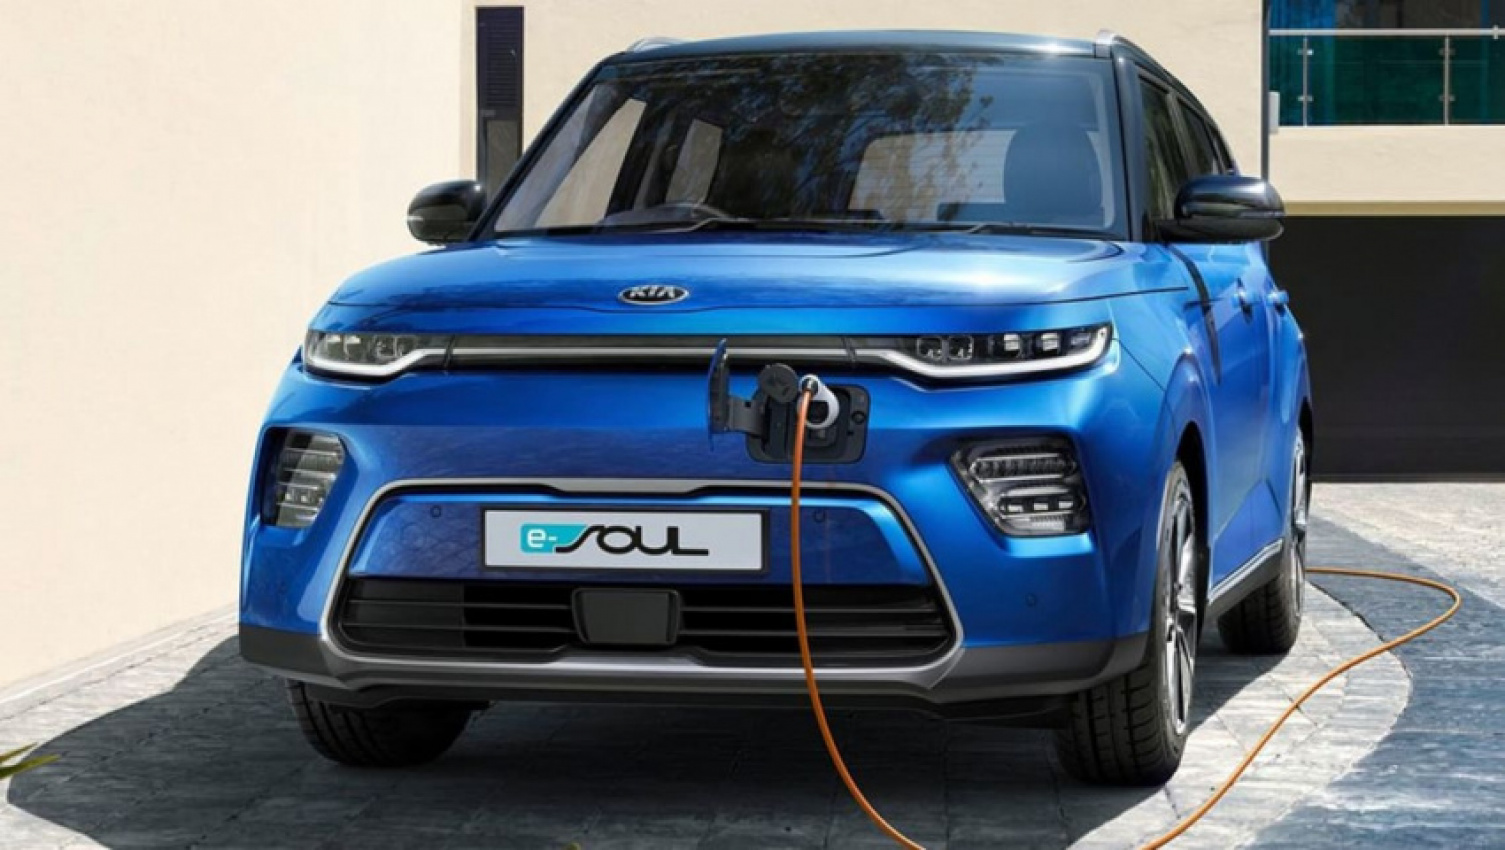 autos, cars, electric, electric cars, family cars, fiat 500, fiat 500 2022, fiat hatchback range, fiat news, fiat suv range, fiat wagon range, ford hatchback range, ford mustang mach-e, ford news, ford suv range, ford wagon range, green cars, hatchback, industry news, kia hatchback range, kia news, kia soul, kia suv range, kia wagon range, mg 6 plus, mg hatchback range, mg suv range, mg wagon range, small cars, volkswagen, volkswagen hatchback range, volkswagen news, volkswagen suv range, volkswagen up, volkswagen wagon range, top five electric cars not currently available in australia